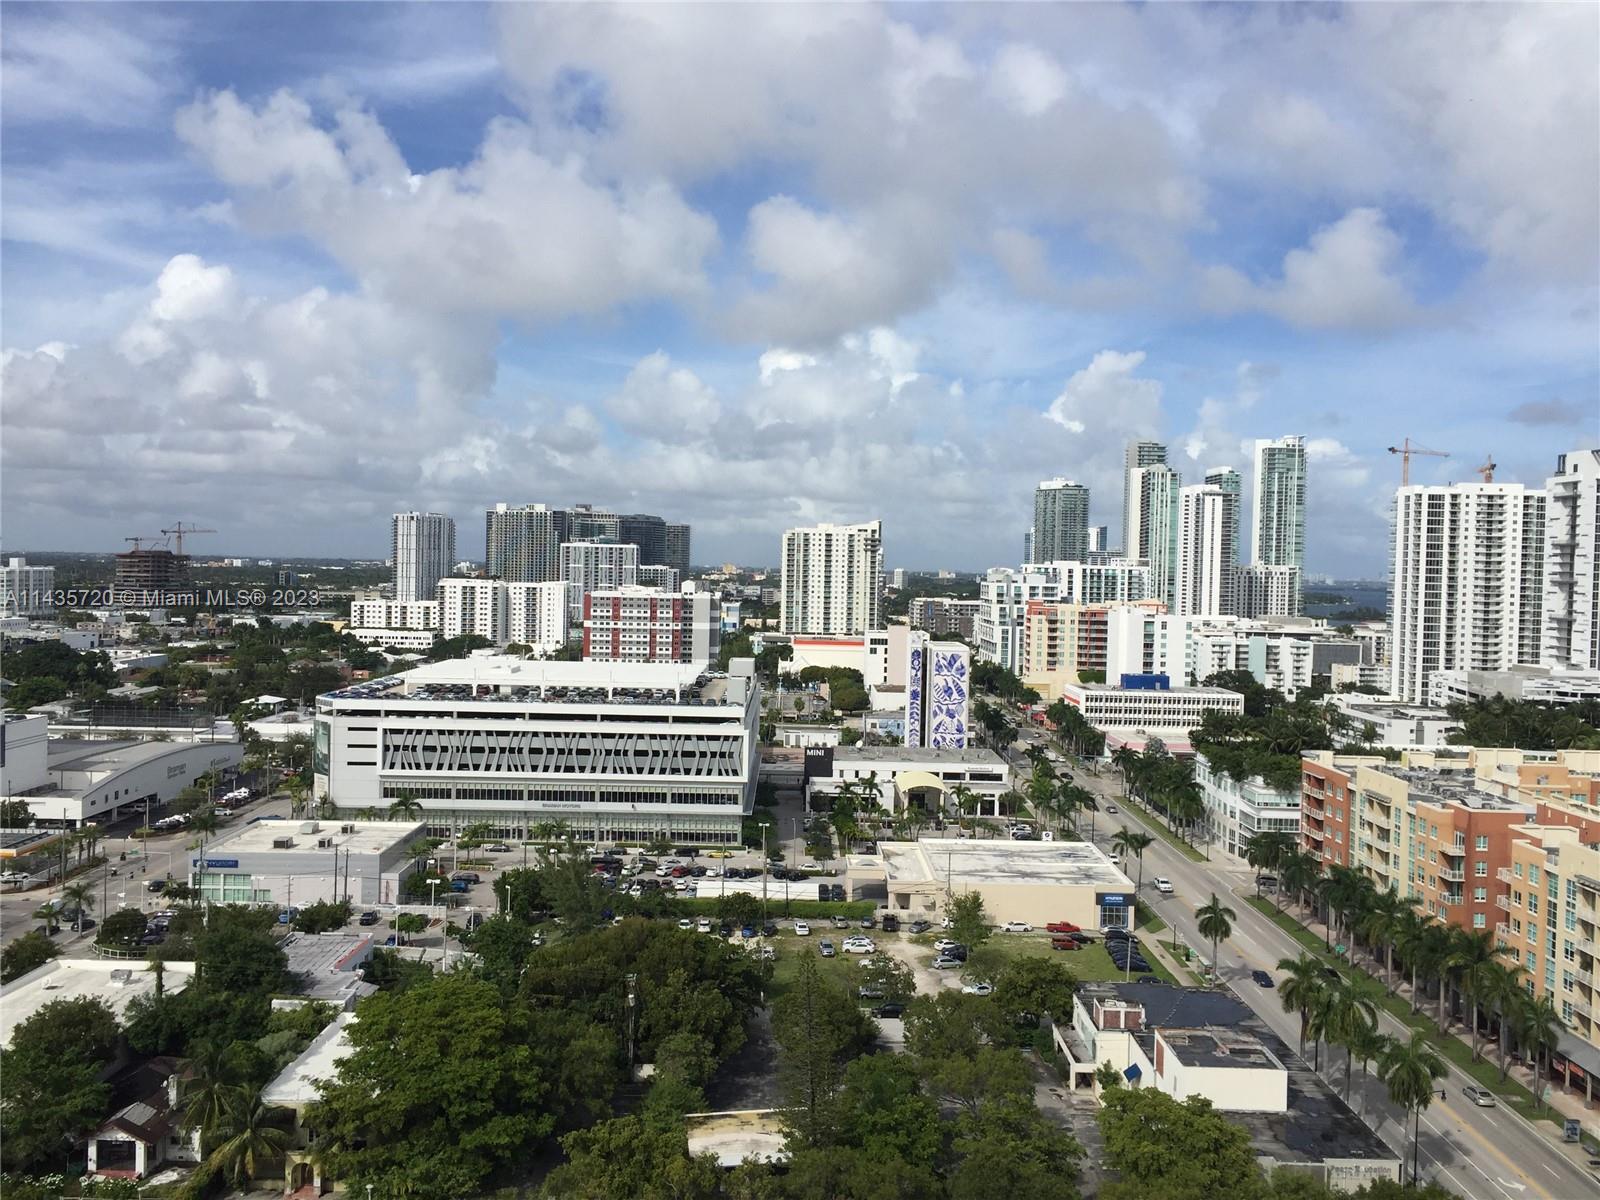 Beautiful and spacious 2/2 unit right on Biscayne Blvd with great views. 2 balconies, balcony on living area and master bedroom.
Walking distance to restaurants, shopping, entertainment and parks.Close to the Convention Center, Opera House, Miami Airlines Arena, Bayside Marketplace.
The unit comes with one assigned parking space